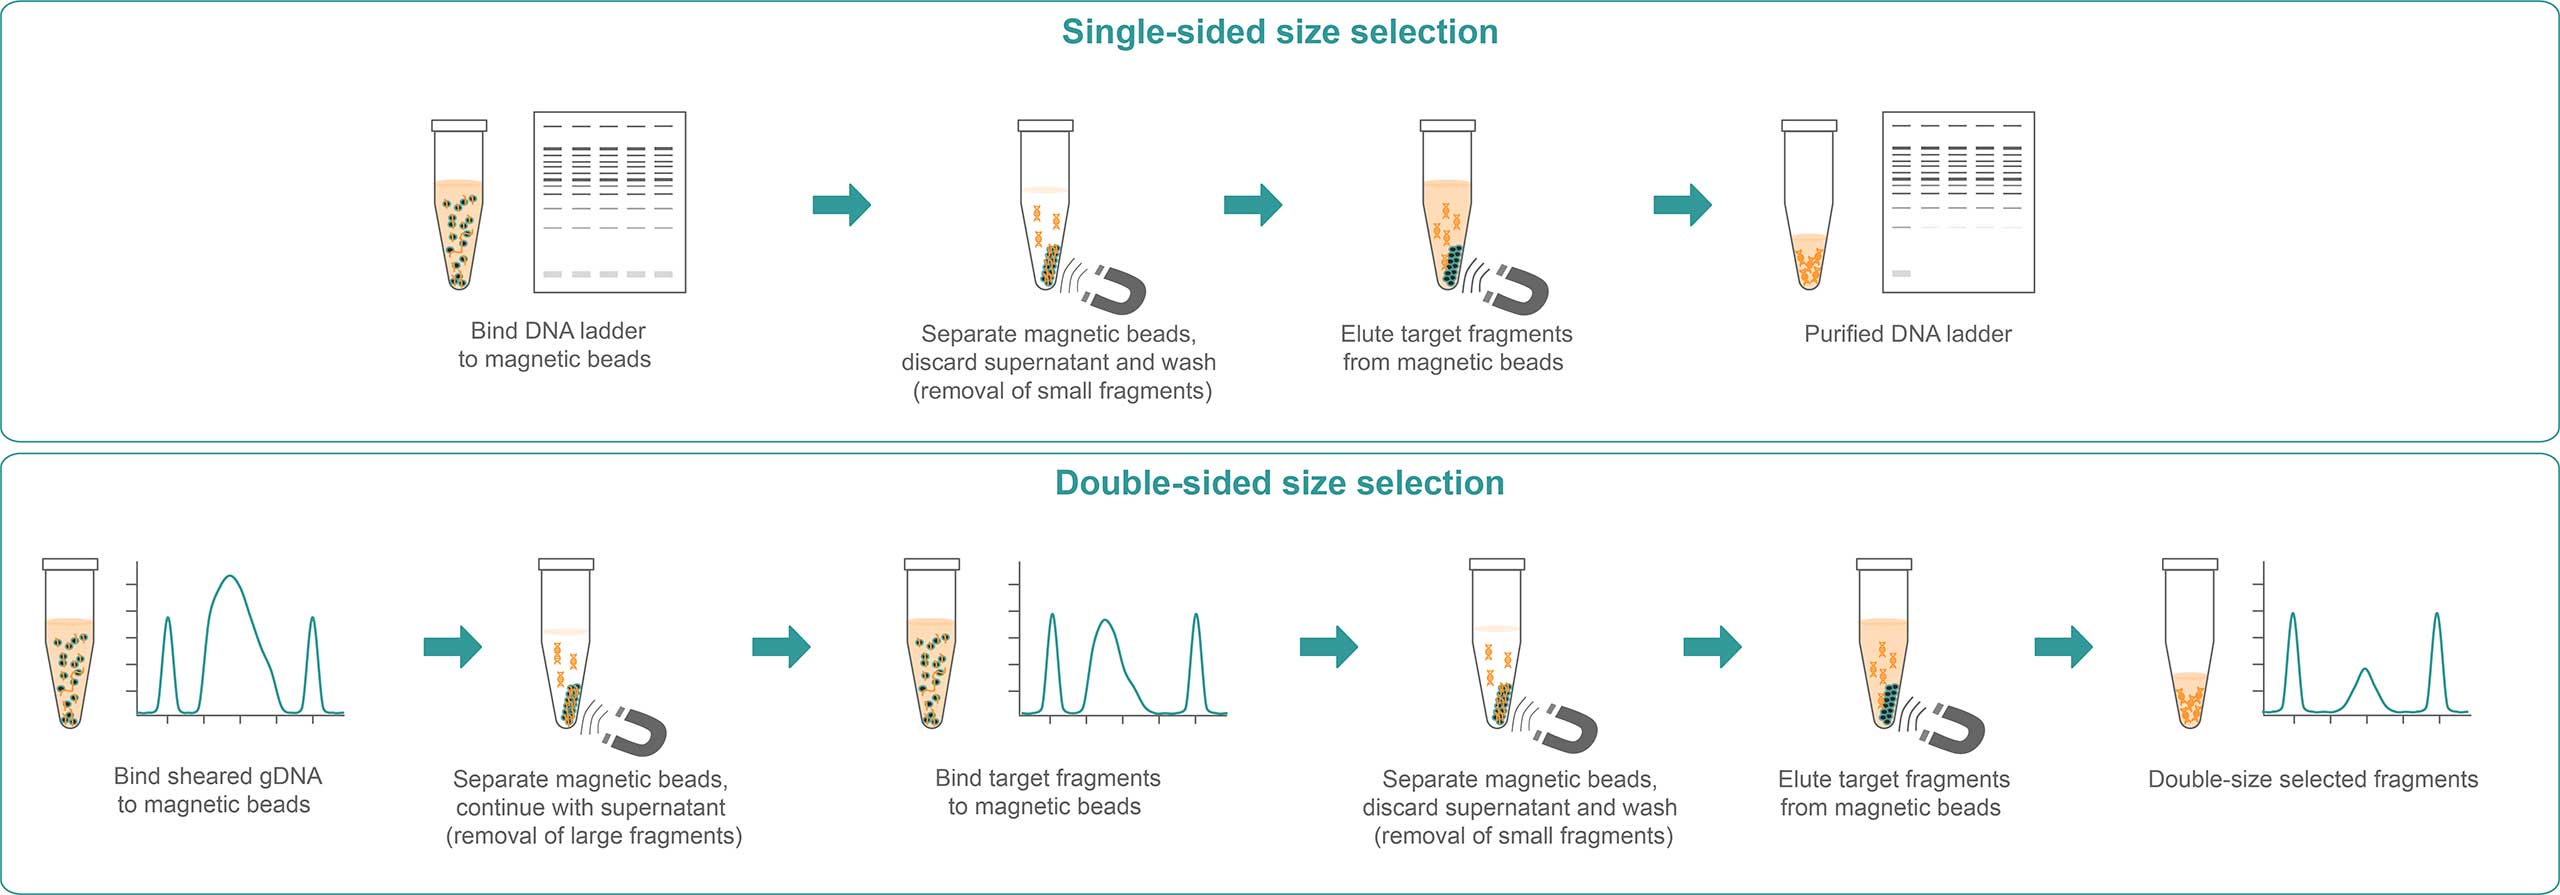 Illustration of a step-by-step procedure of single- and double-sided DNA size selection.